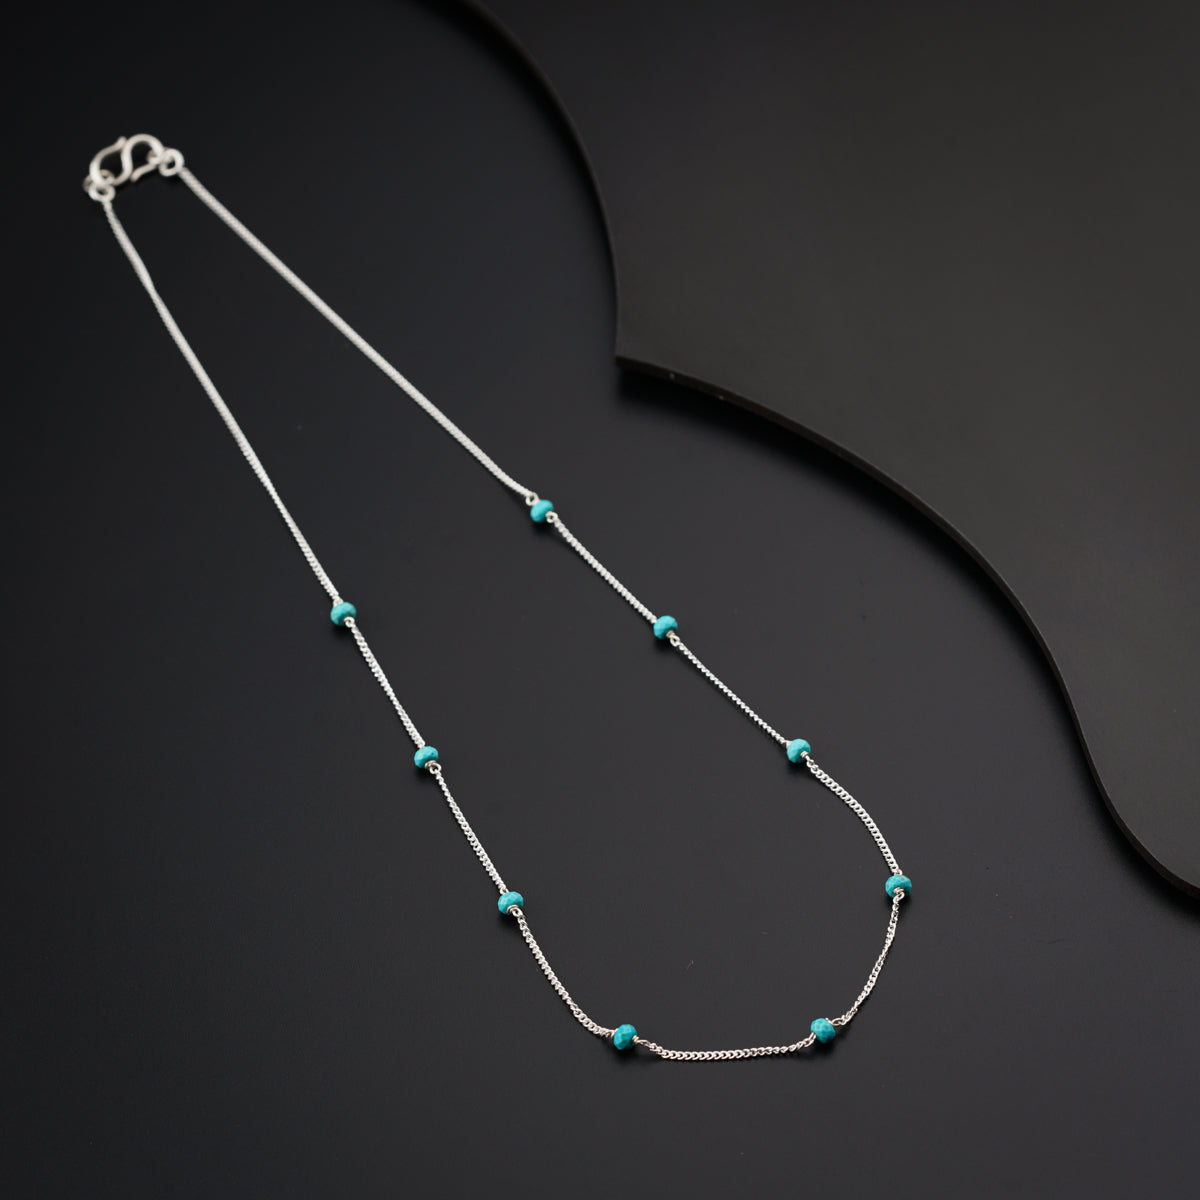 a necklace with turquoise beads and a silver chain